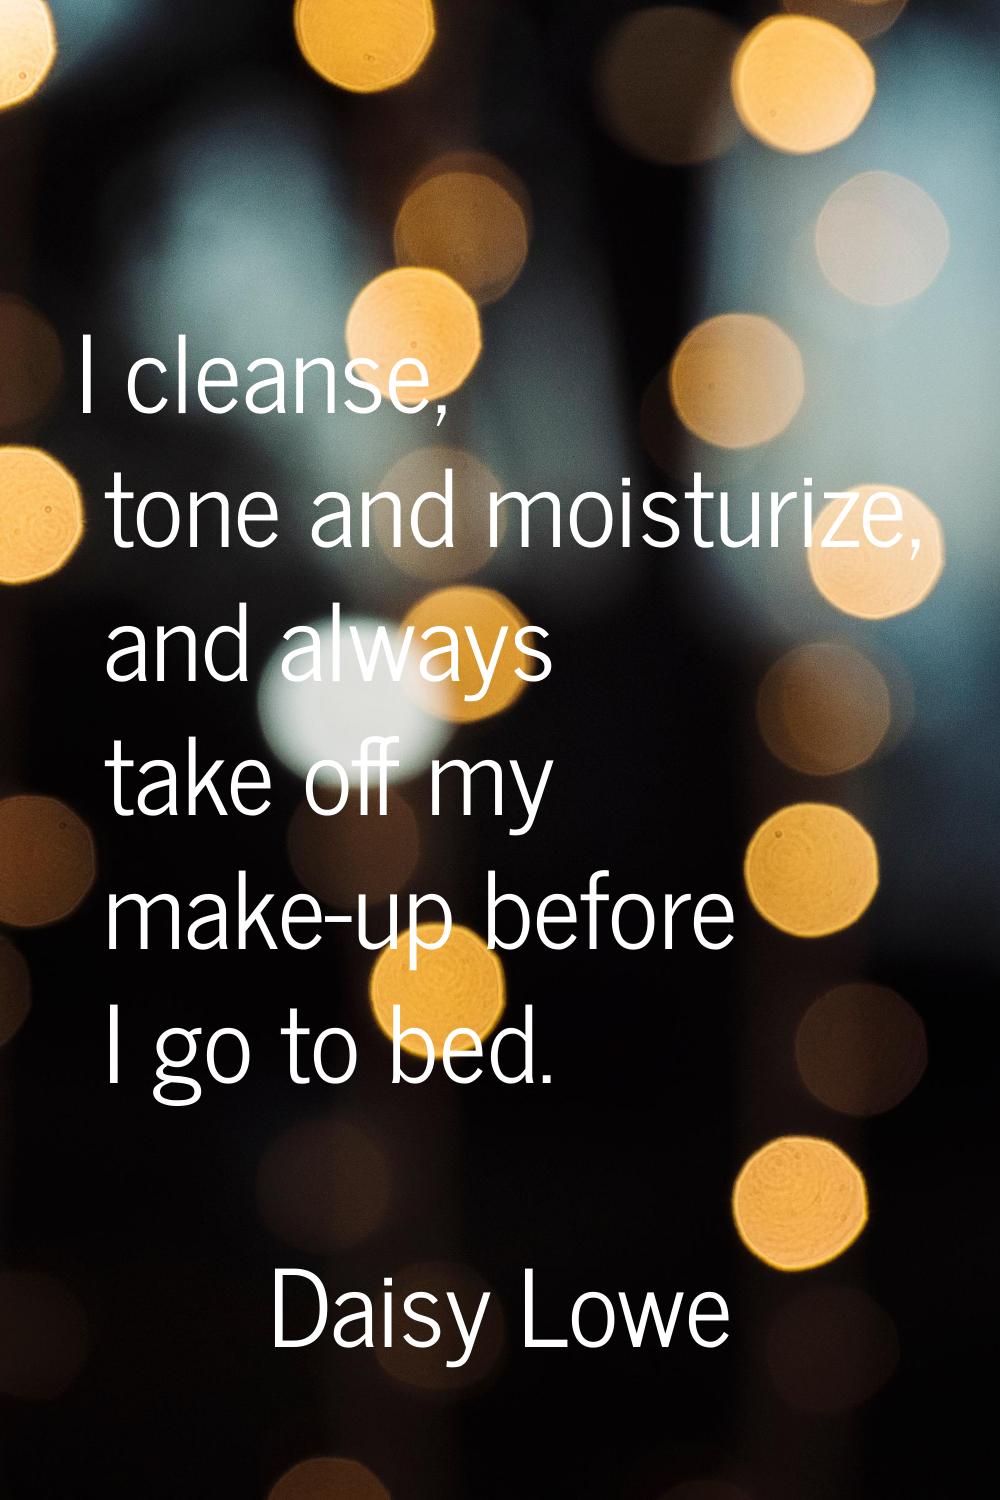 I cleanse, tone and moisturize, and always take off my make-up before I go to bed.